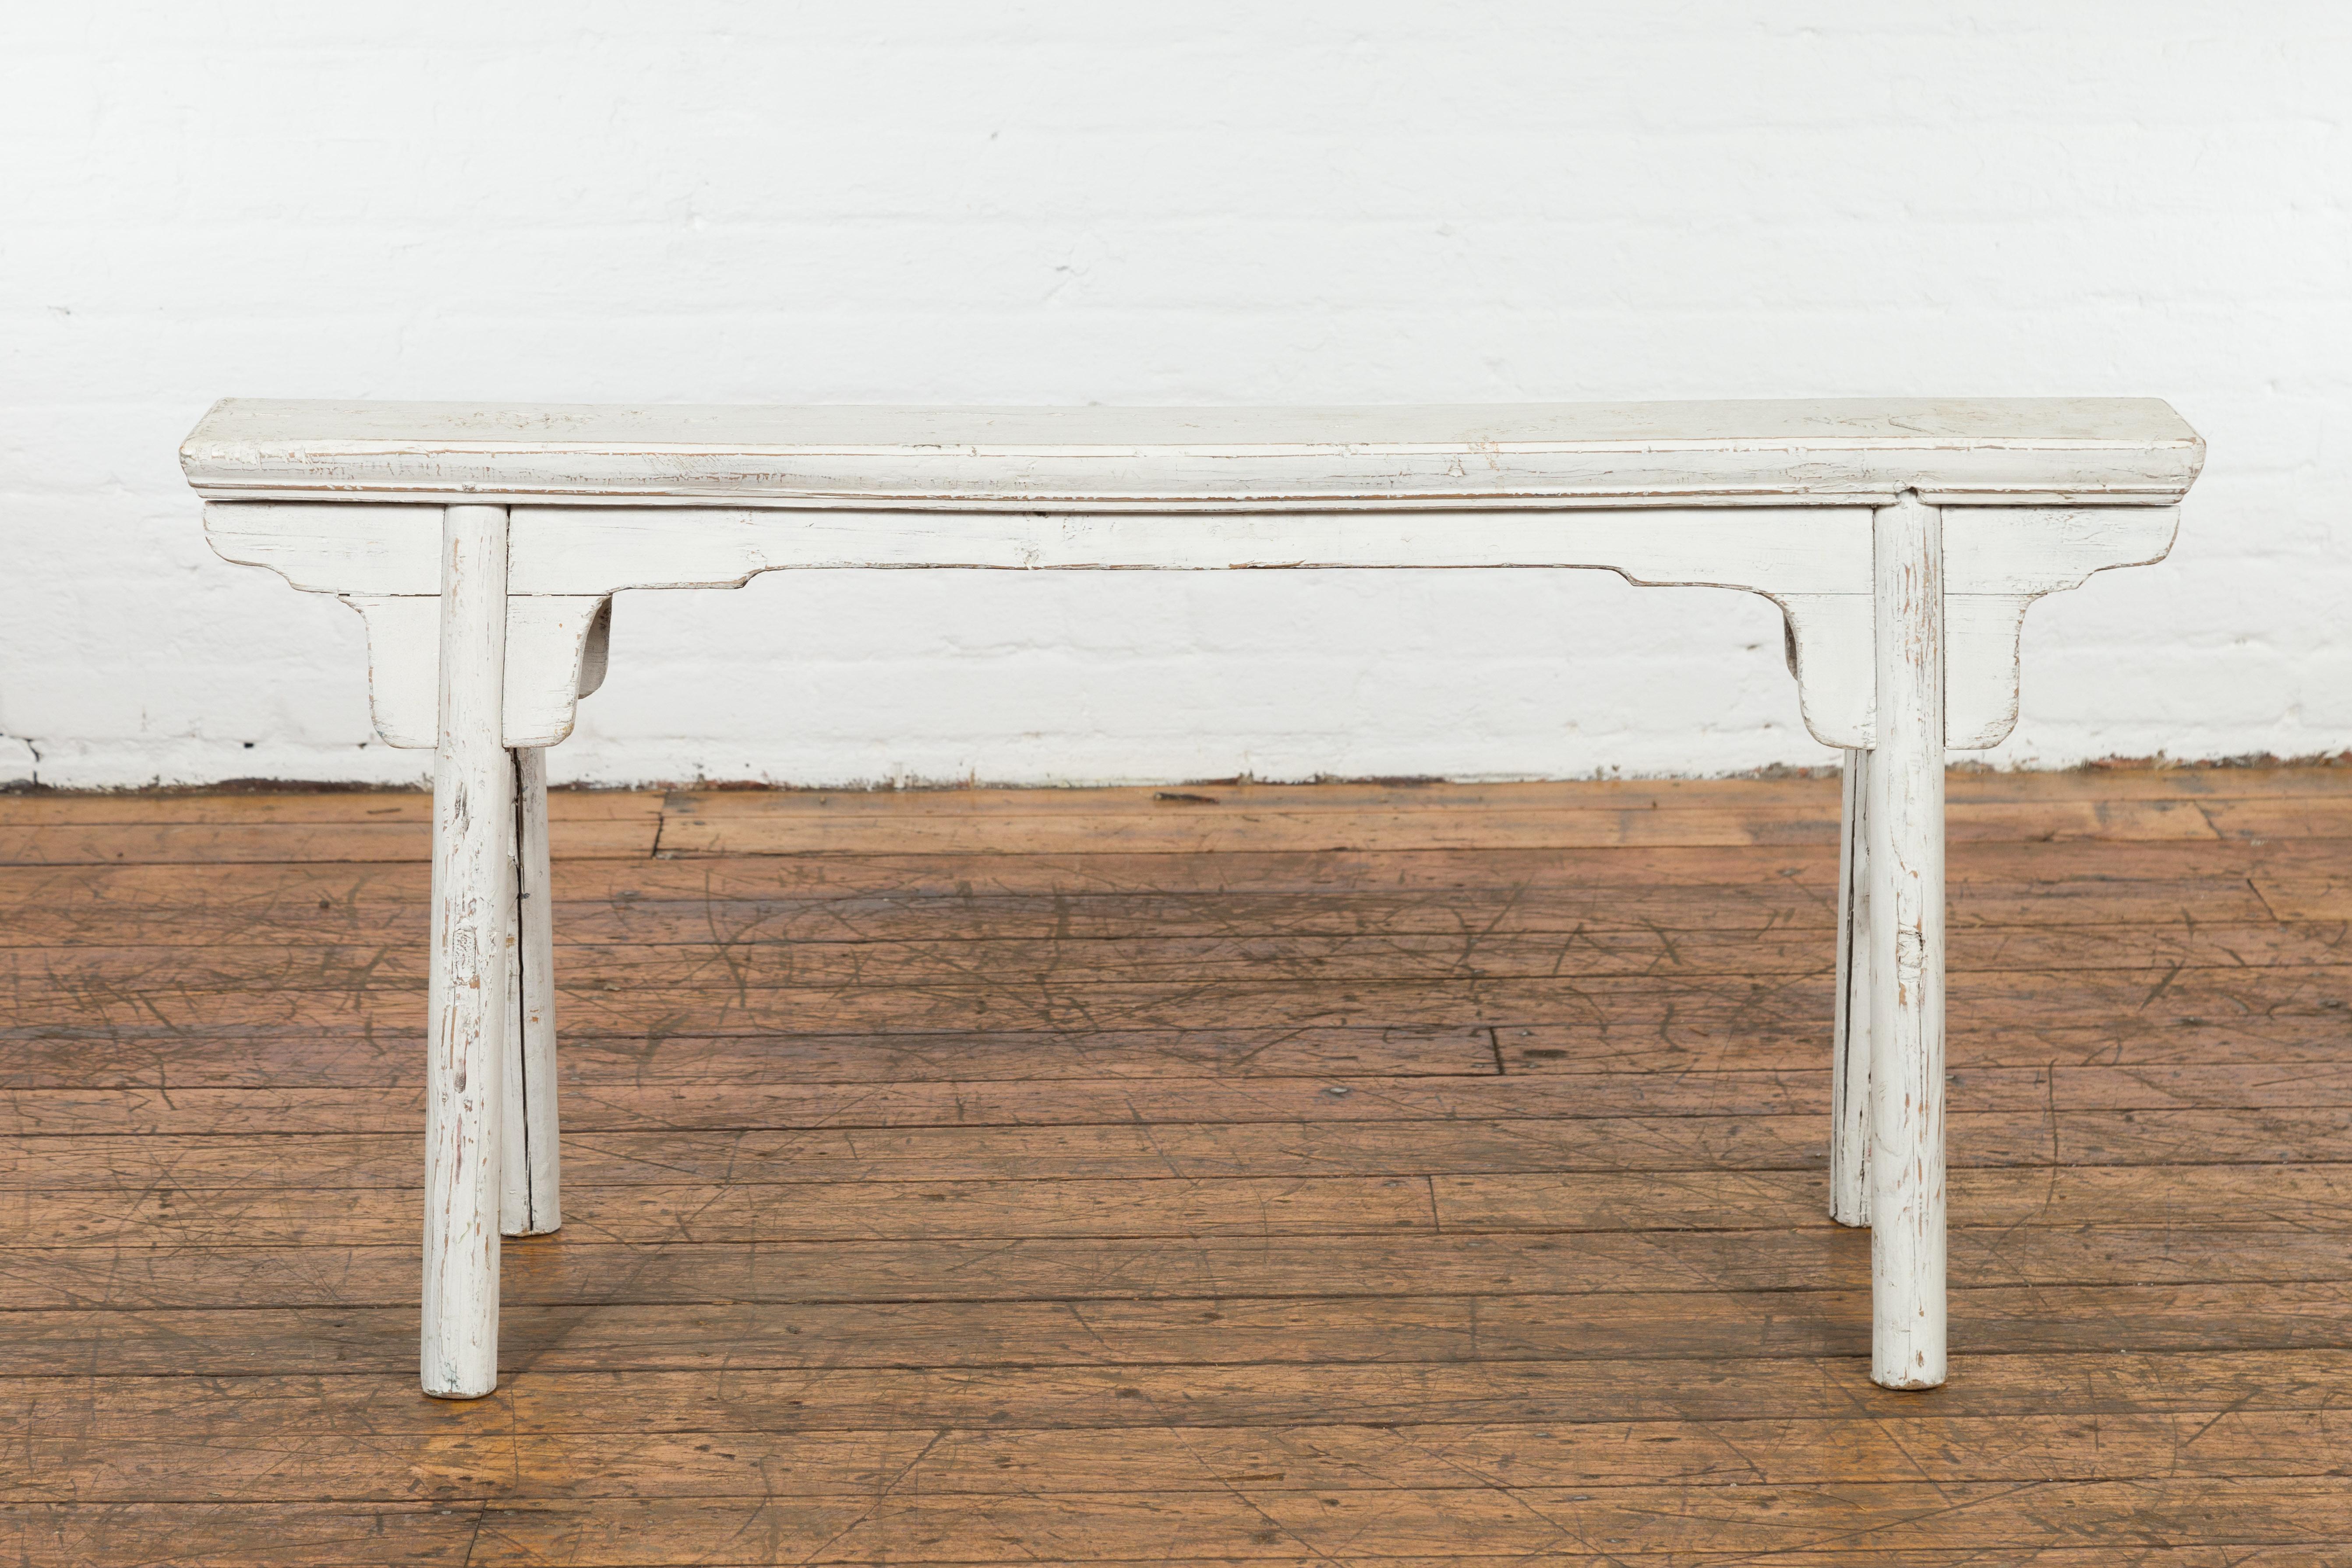 A Chinese vintage Ming Dynasty style white painted wooden bench from the mid 20th century with A-form base, carved spandrels and distressed finish. Created in China during the Midcentury period, this small bench draws the attention with its soft